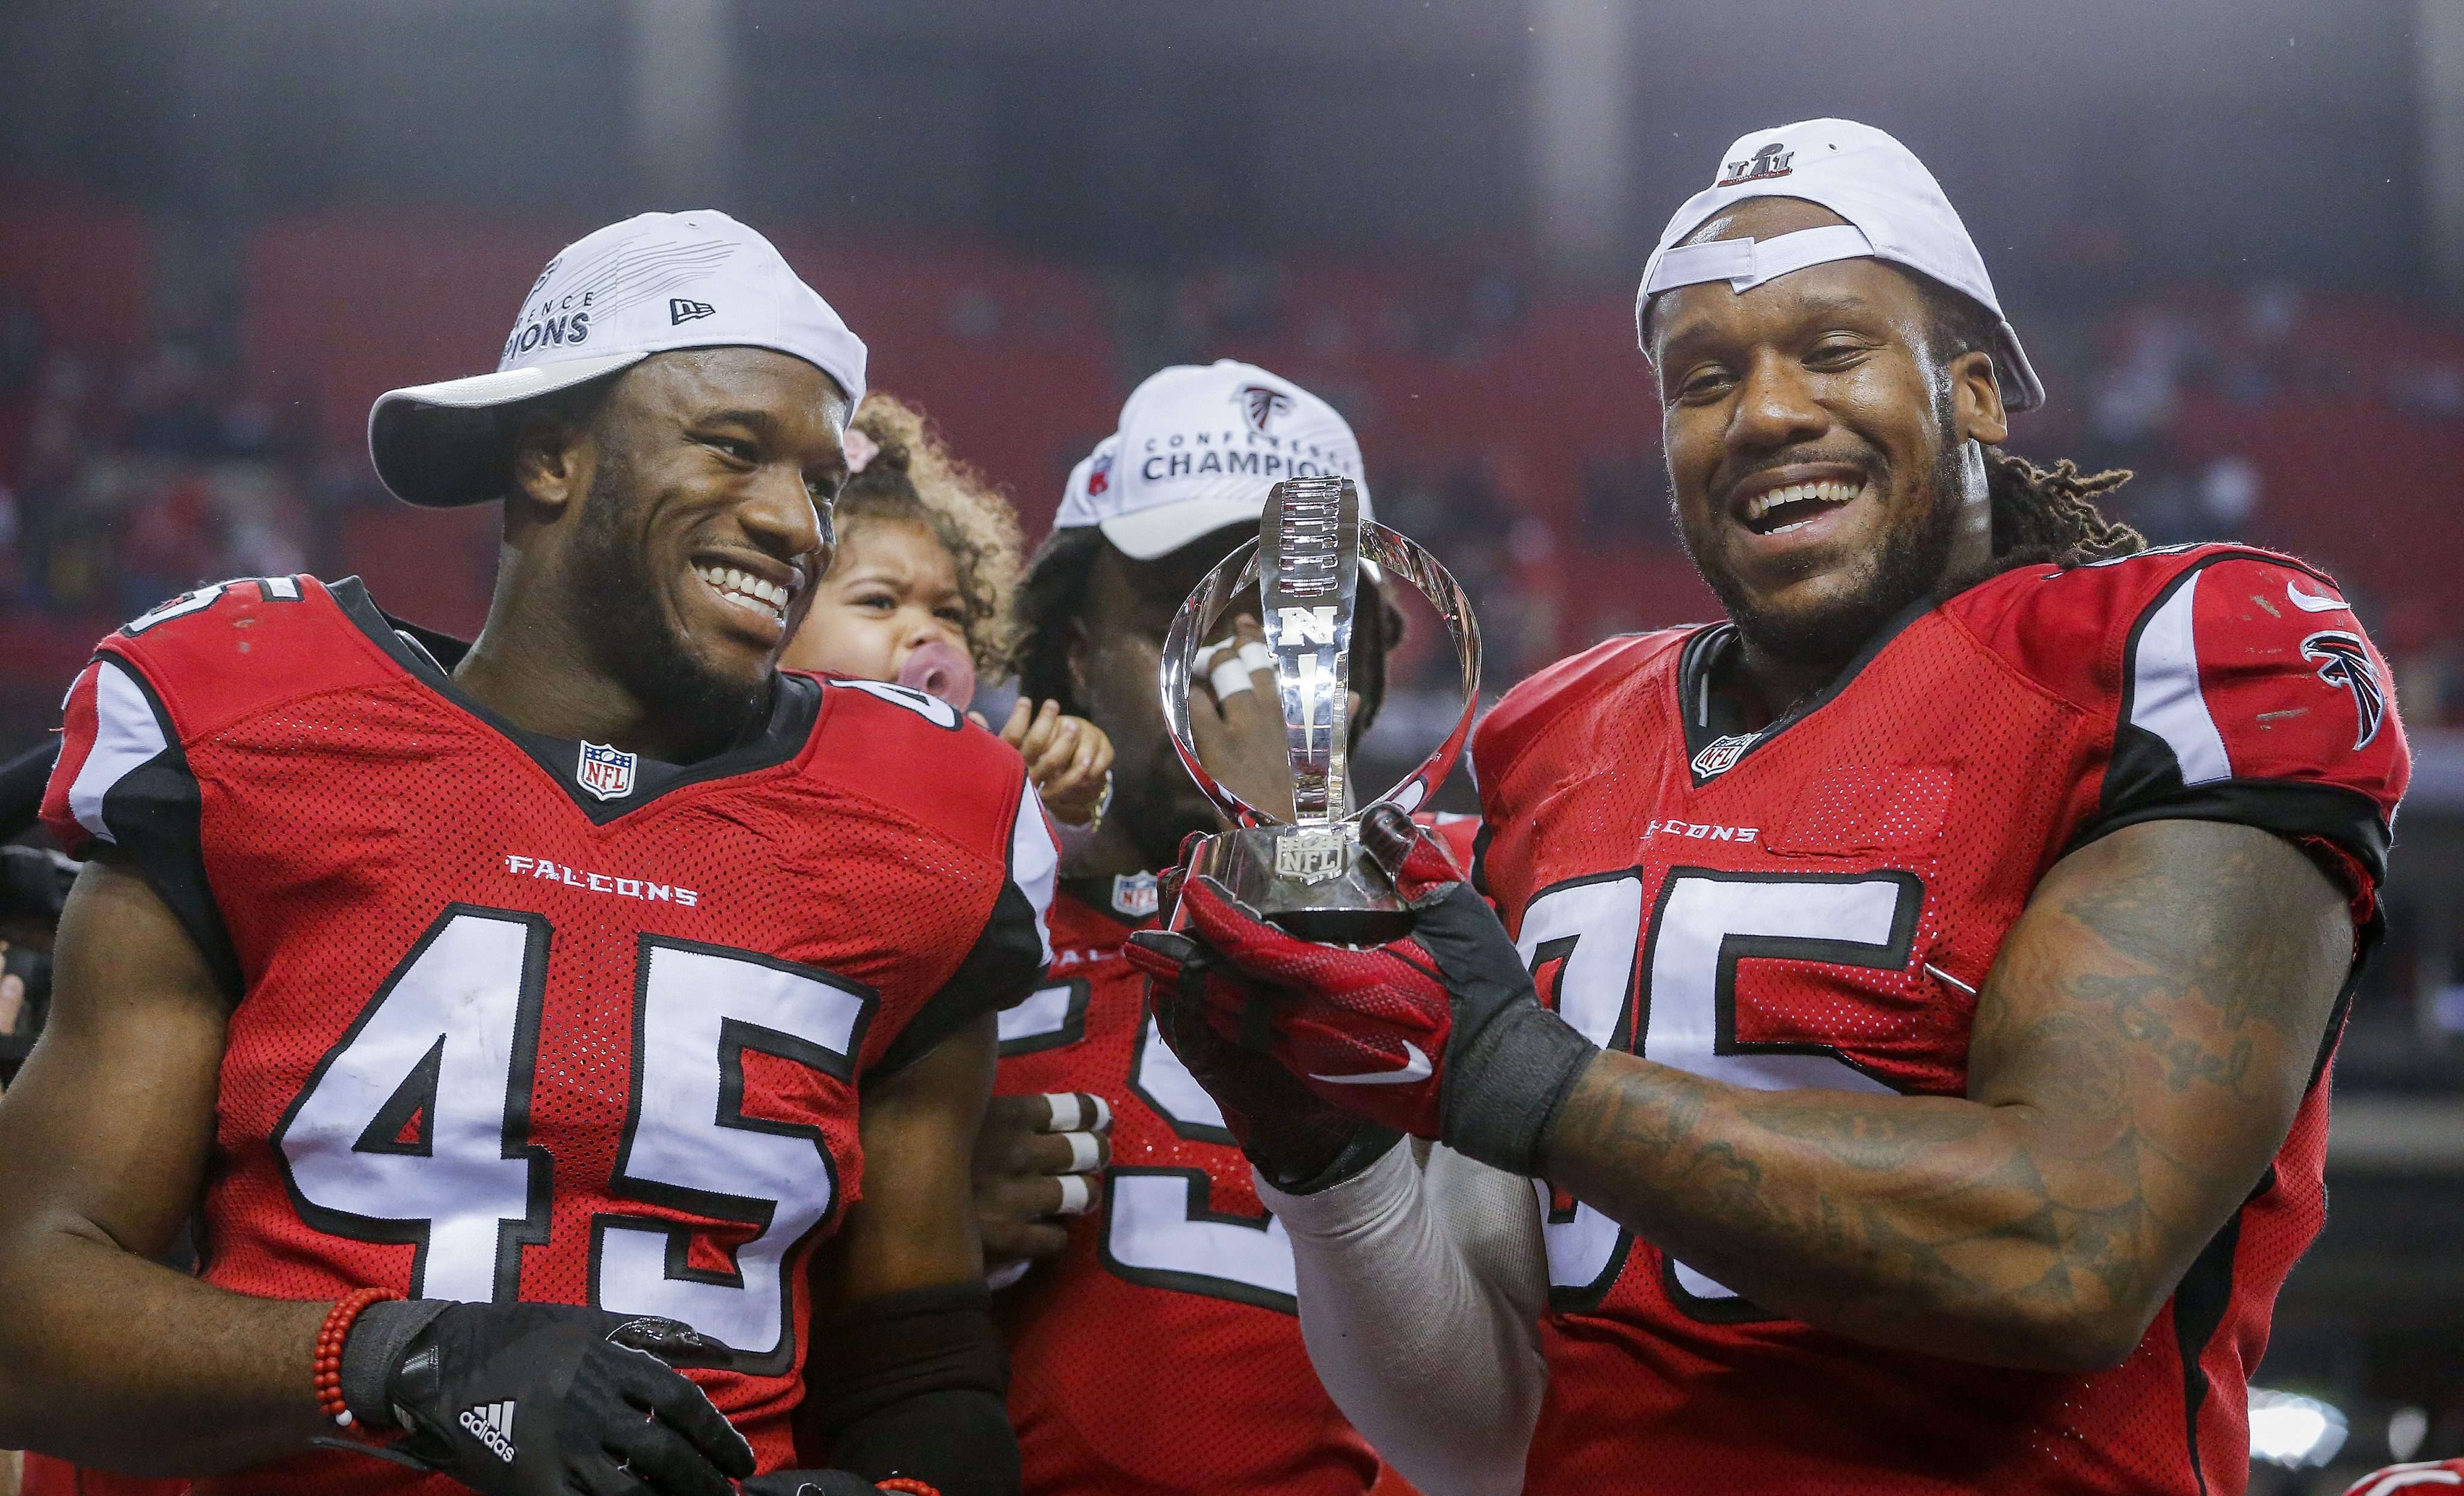 Atlanta Falcons linebacker Deion Jones (left) and Atlanta Falcons defensive tackle Jonathan Babineaux hold the NFC Championship Trophy after the Falcons defeated the Green Bay Packers in the NFC Championship game. Photo: EPA